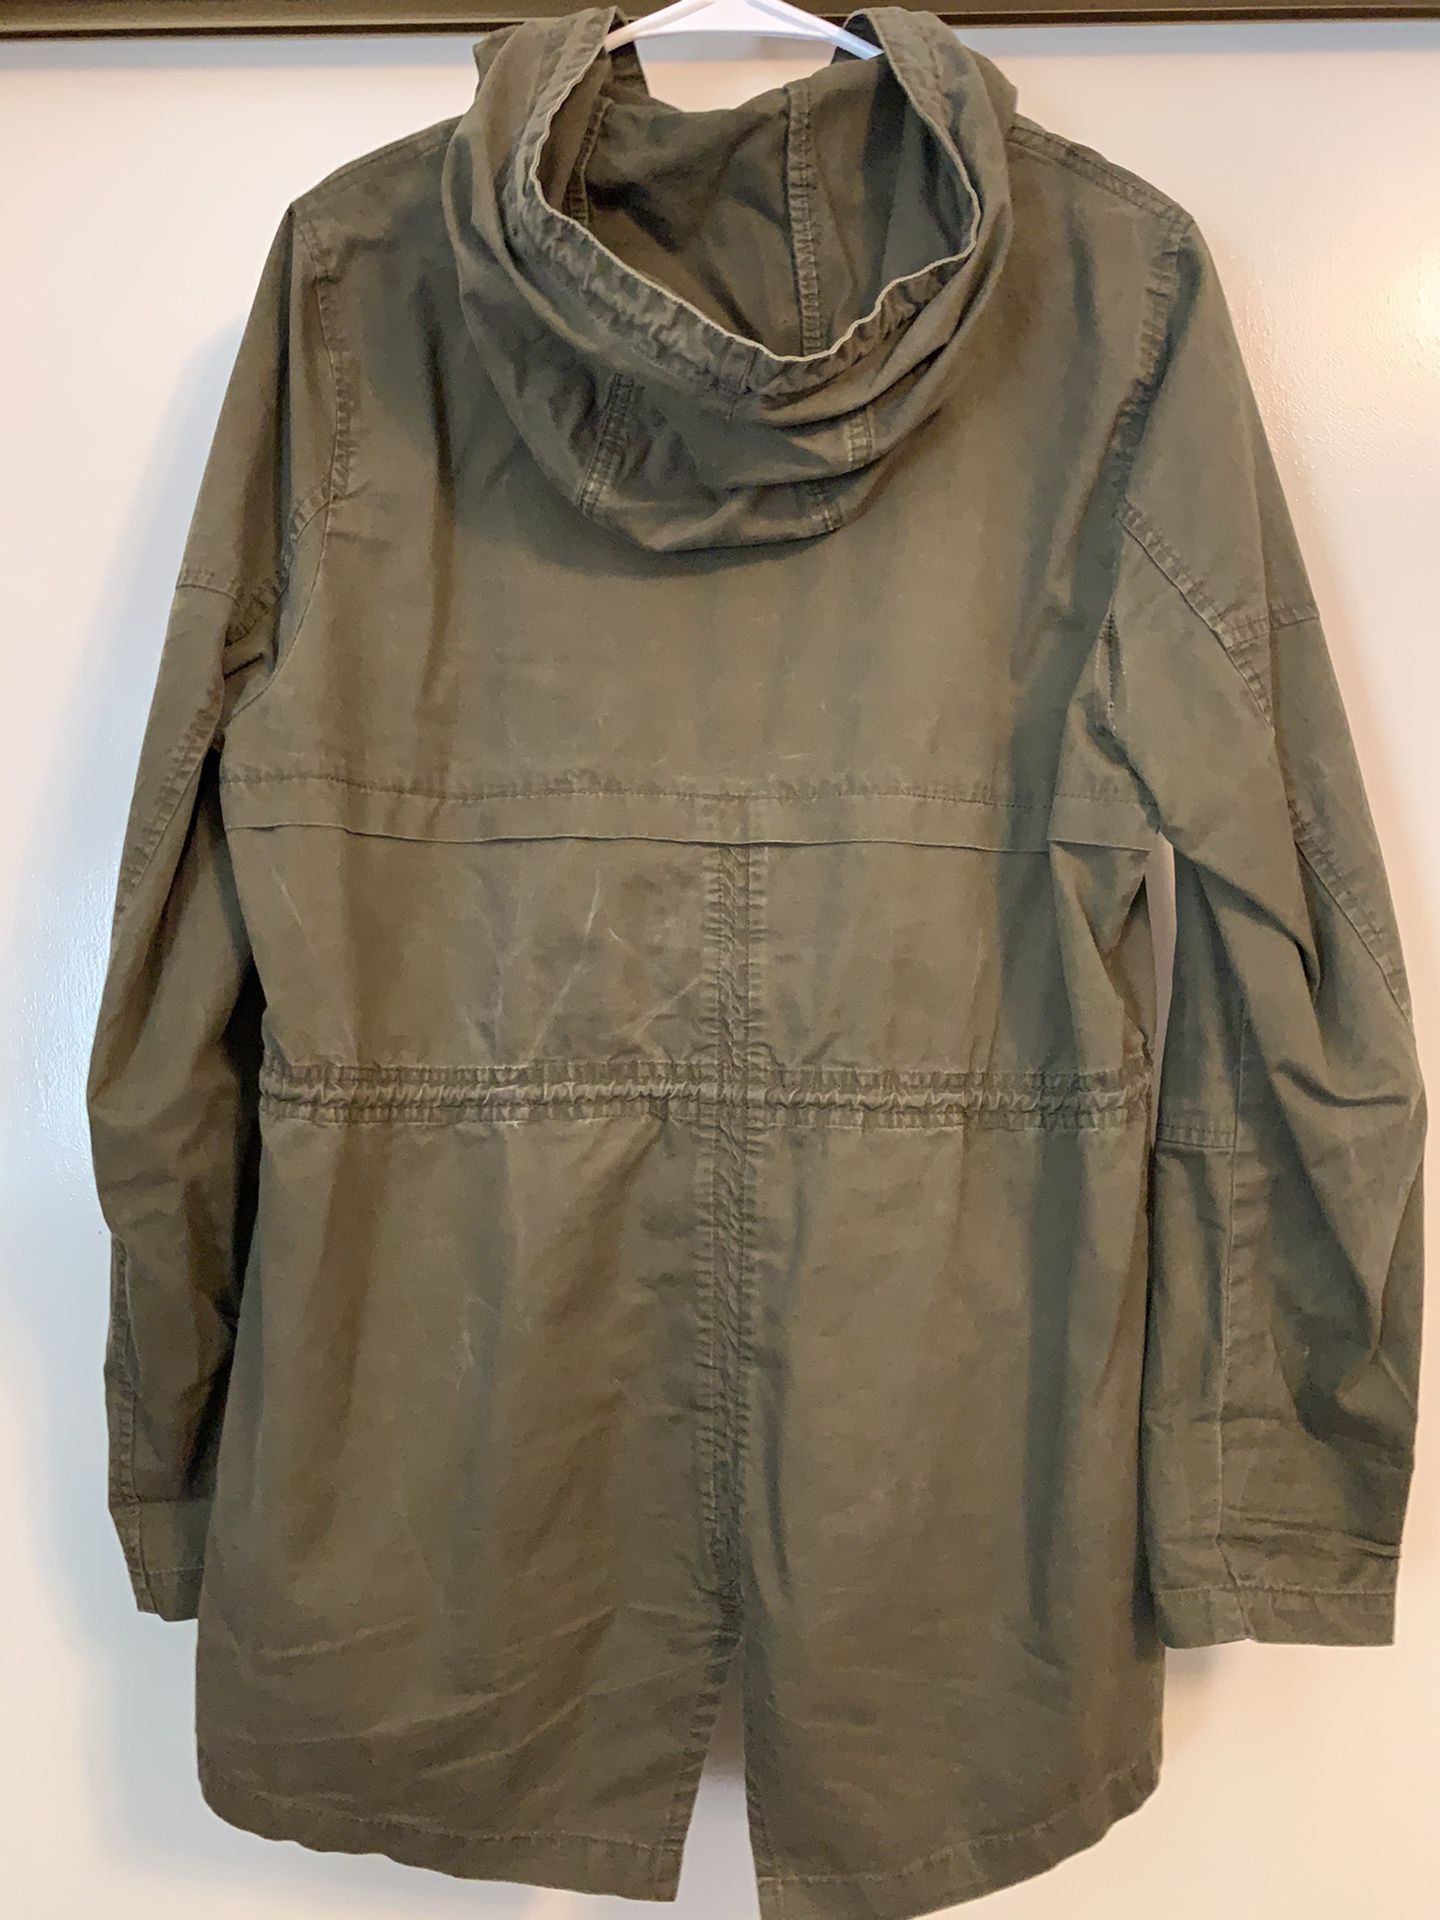 Jacket For Women With Hoodie $15. Good Condition .